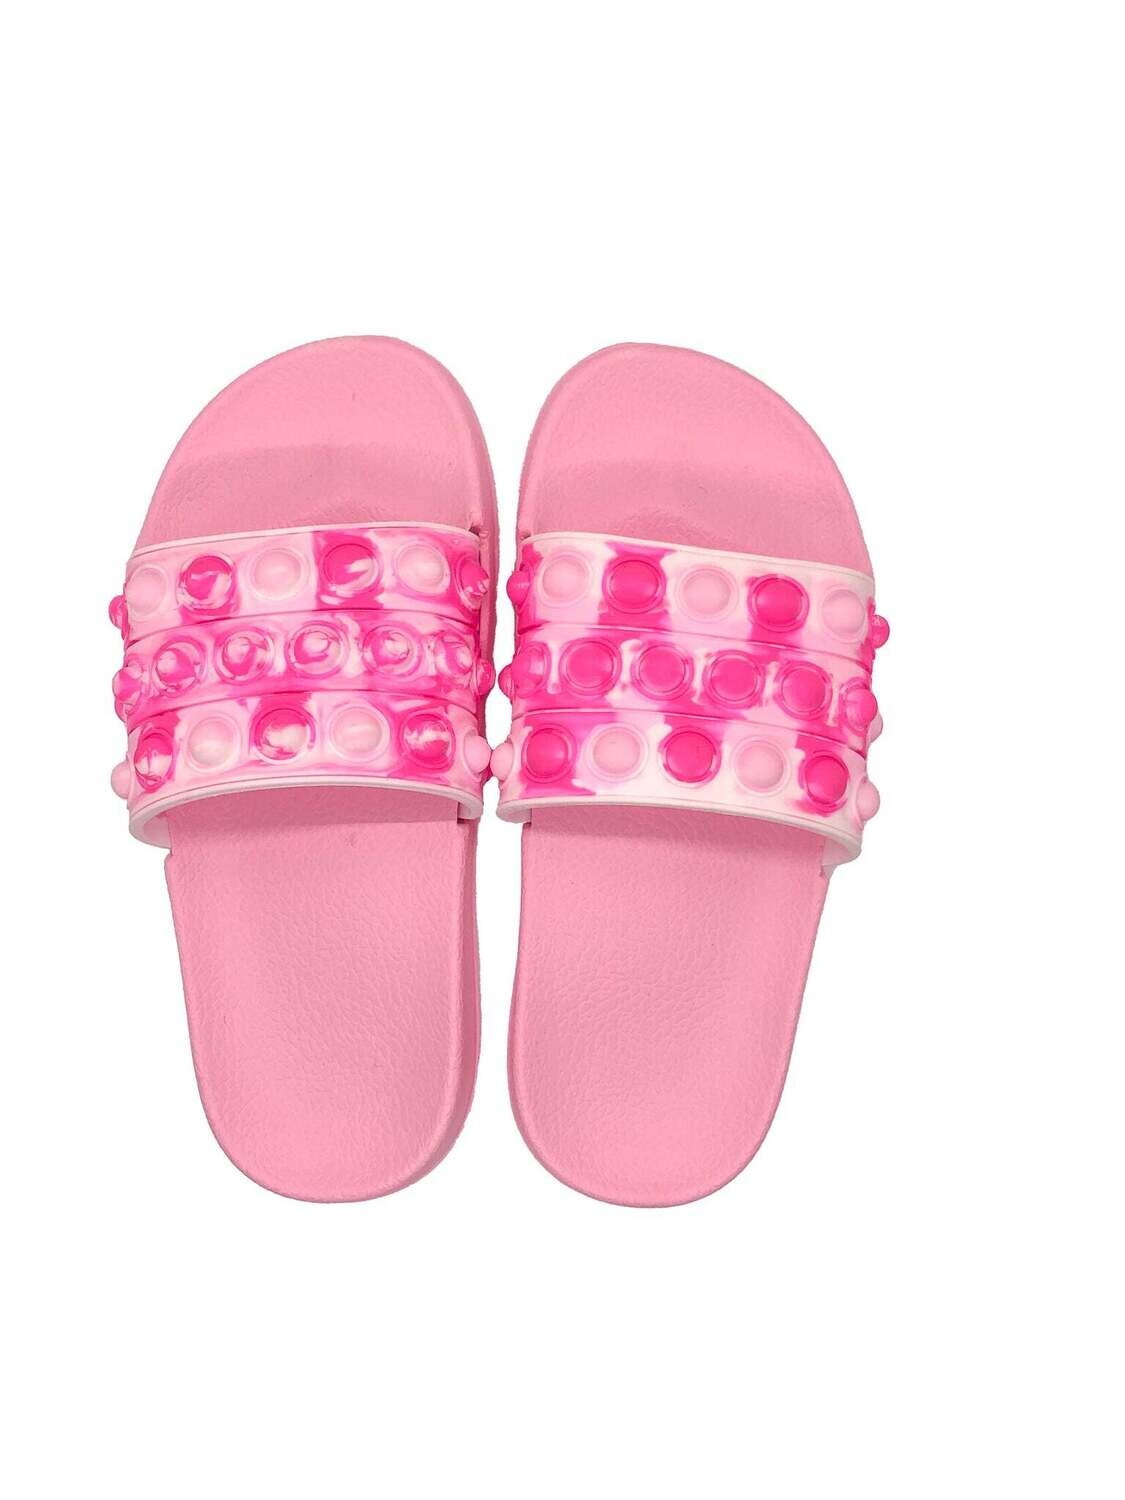 In and Out Slides - Pink